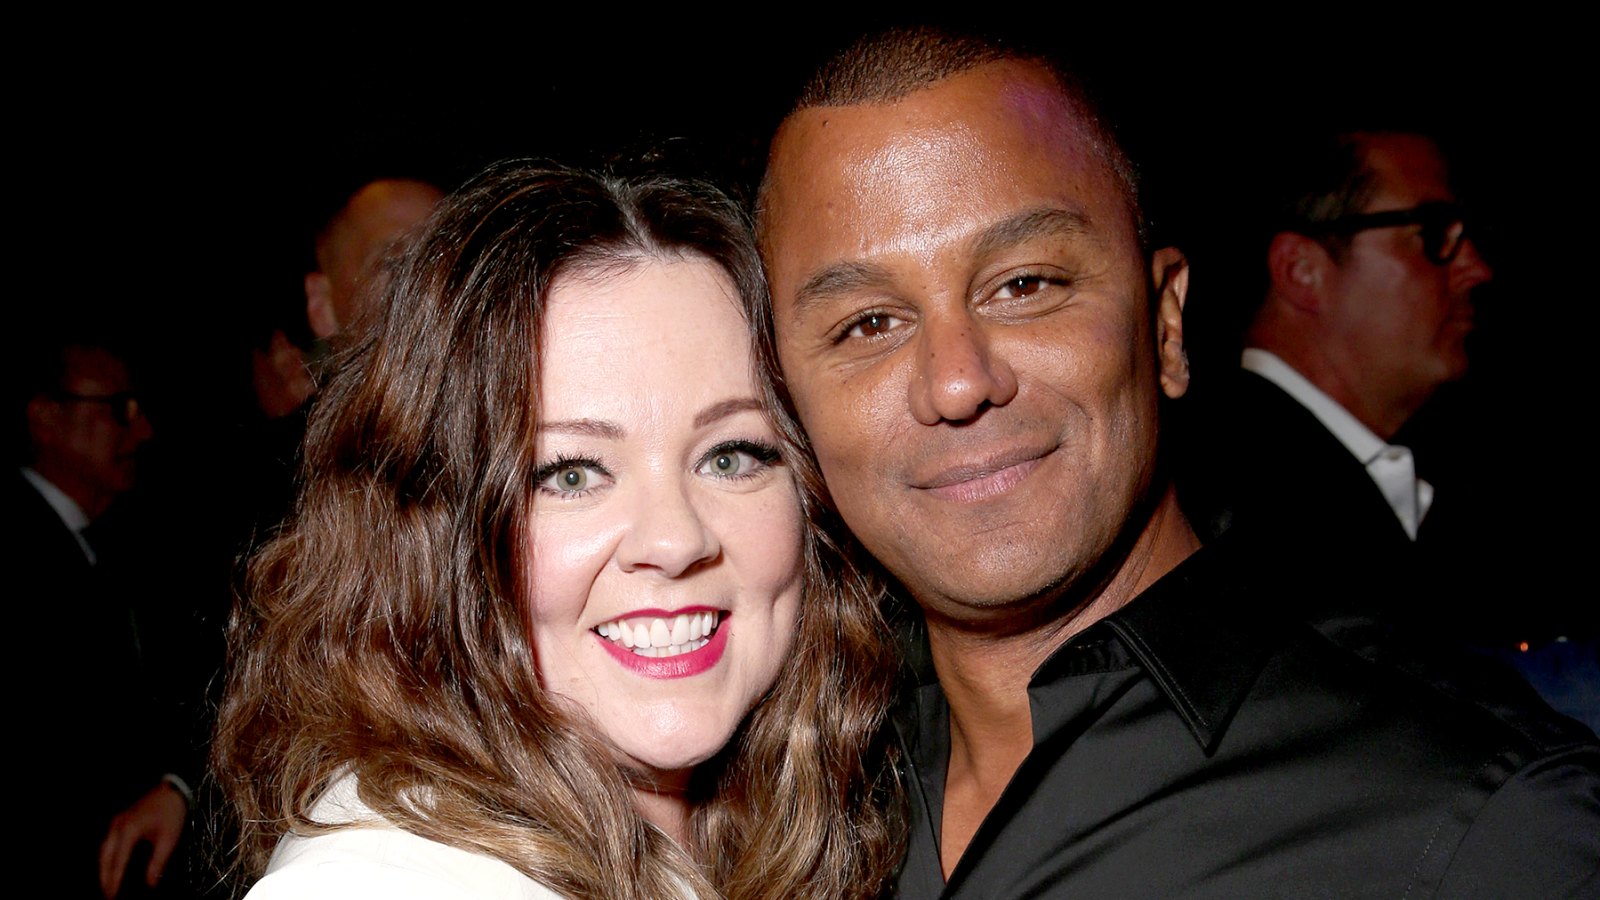 Melissa McCarthy and Yanic Truesdale attend the premiere of USA Pictures' "The Boss" after party at the Hammer Museum on March 28, 2016 in Westwood, California.